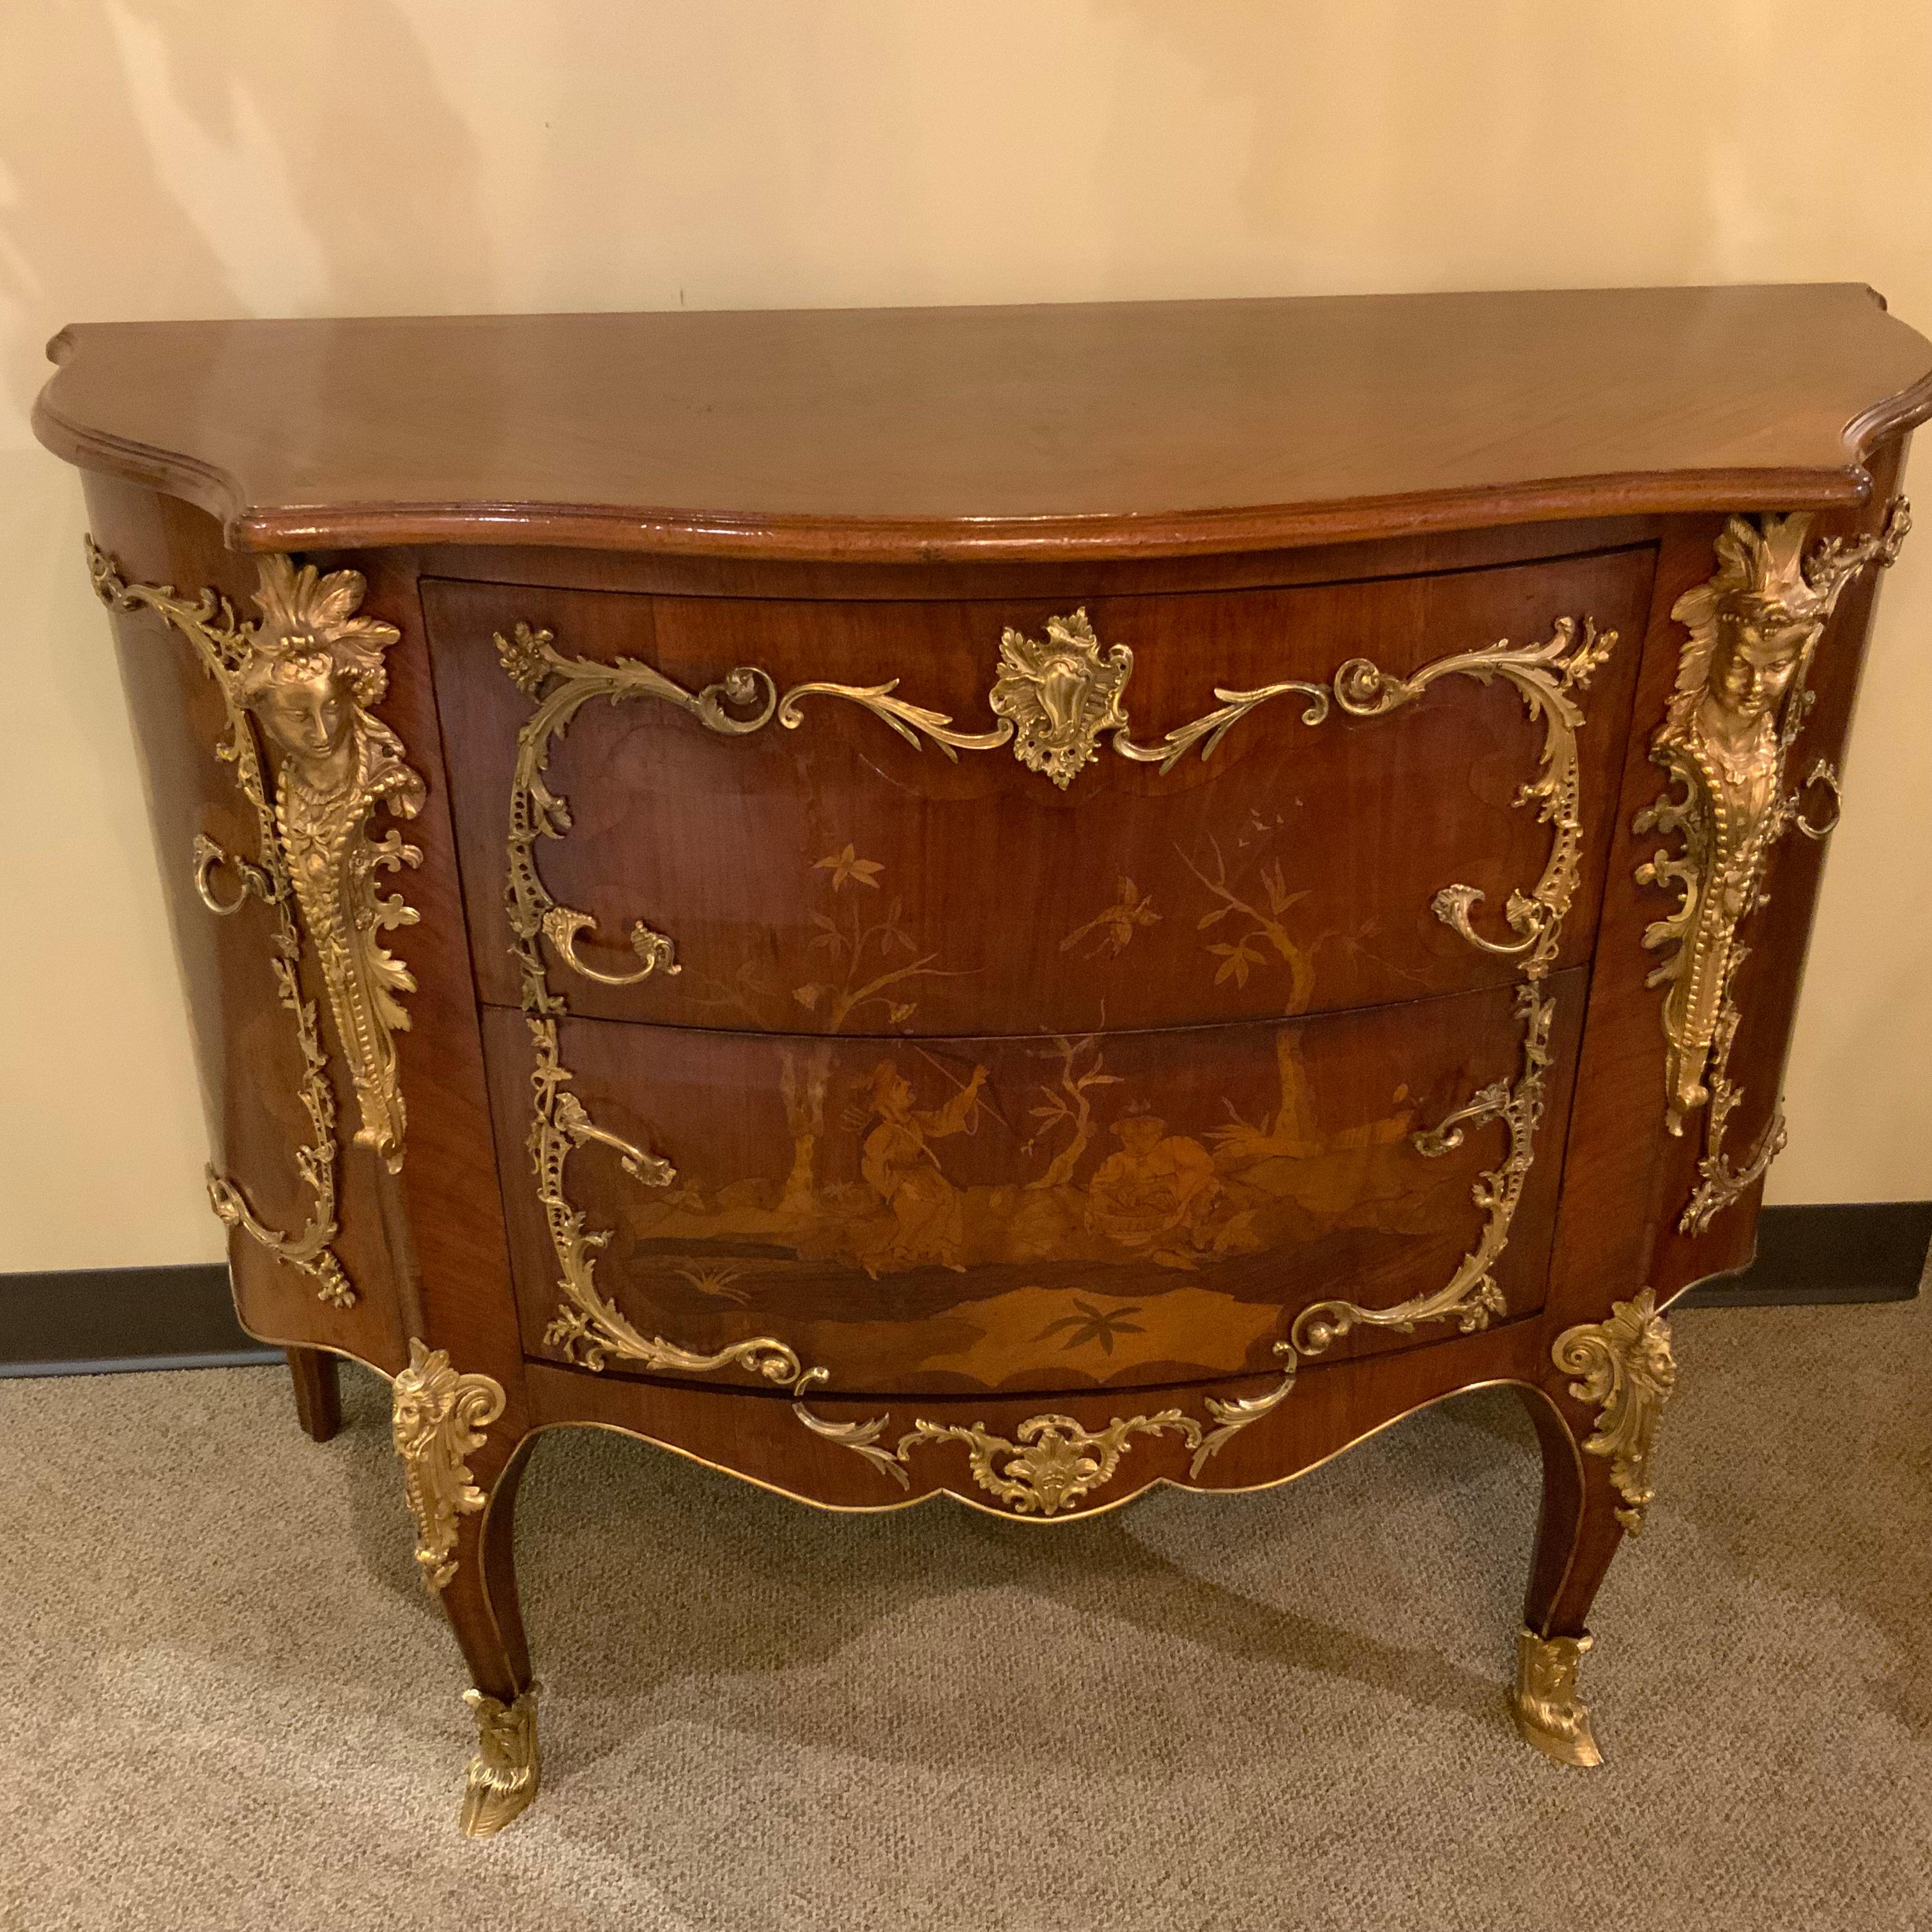 French Pair of Louis XIV-Style Mahogany Inlaid Marquetry Commodes, 19th Century For Sale